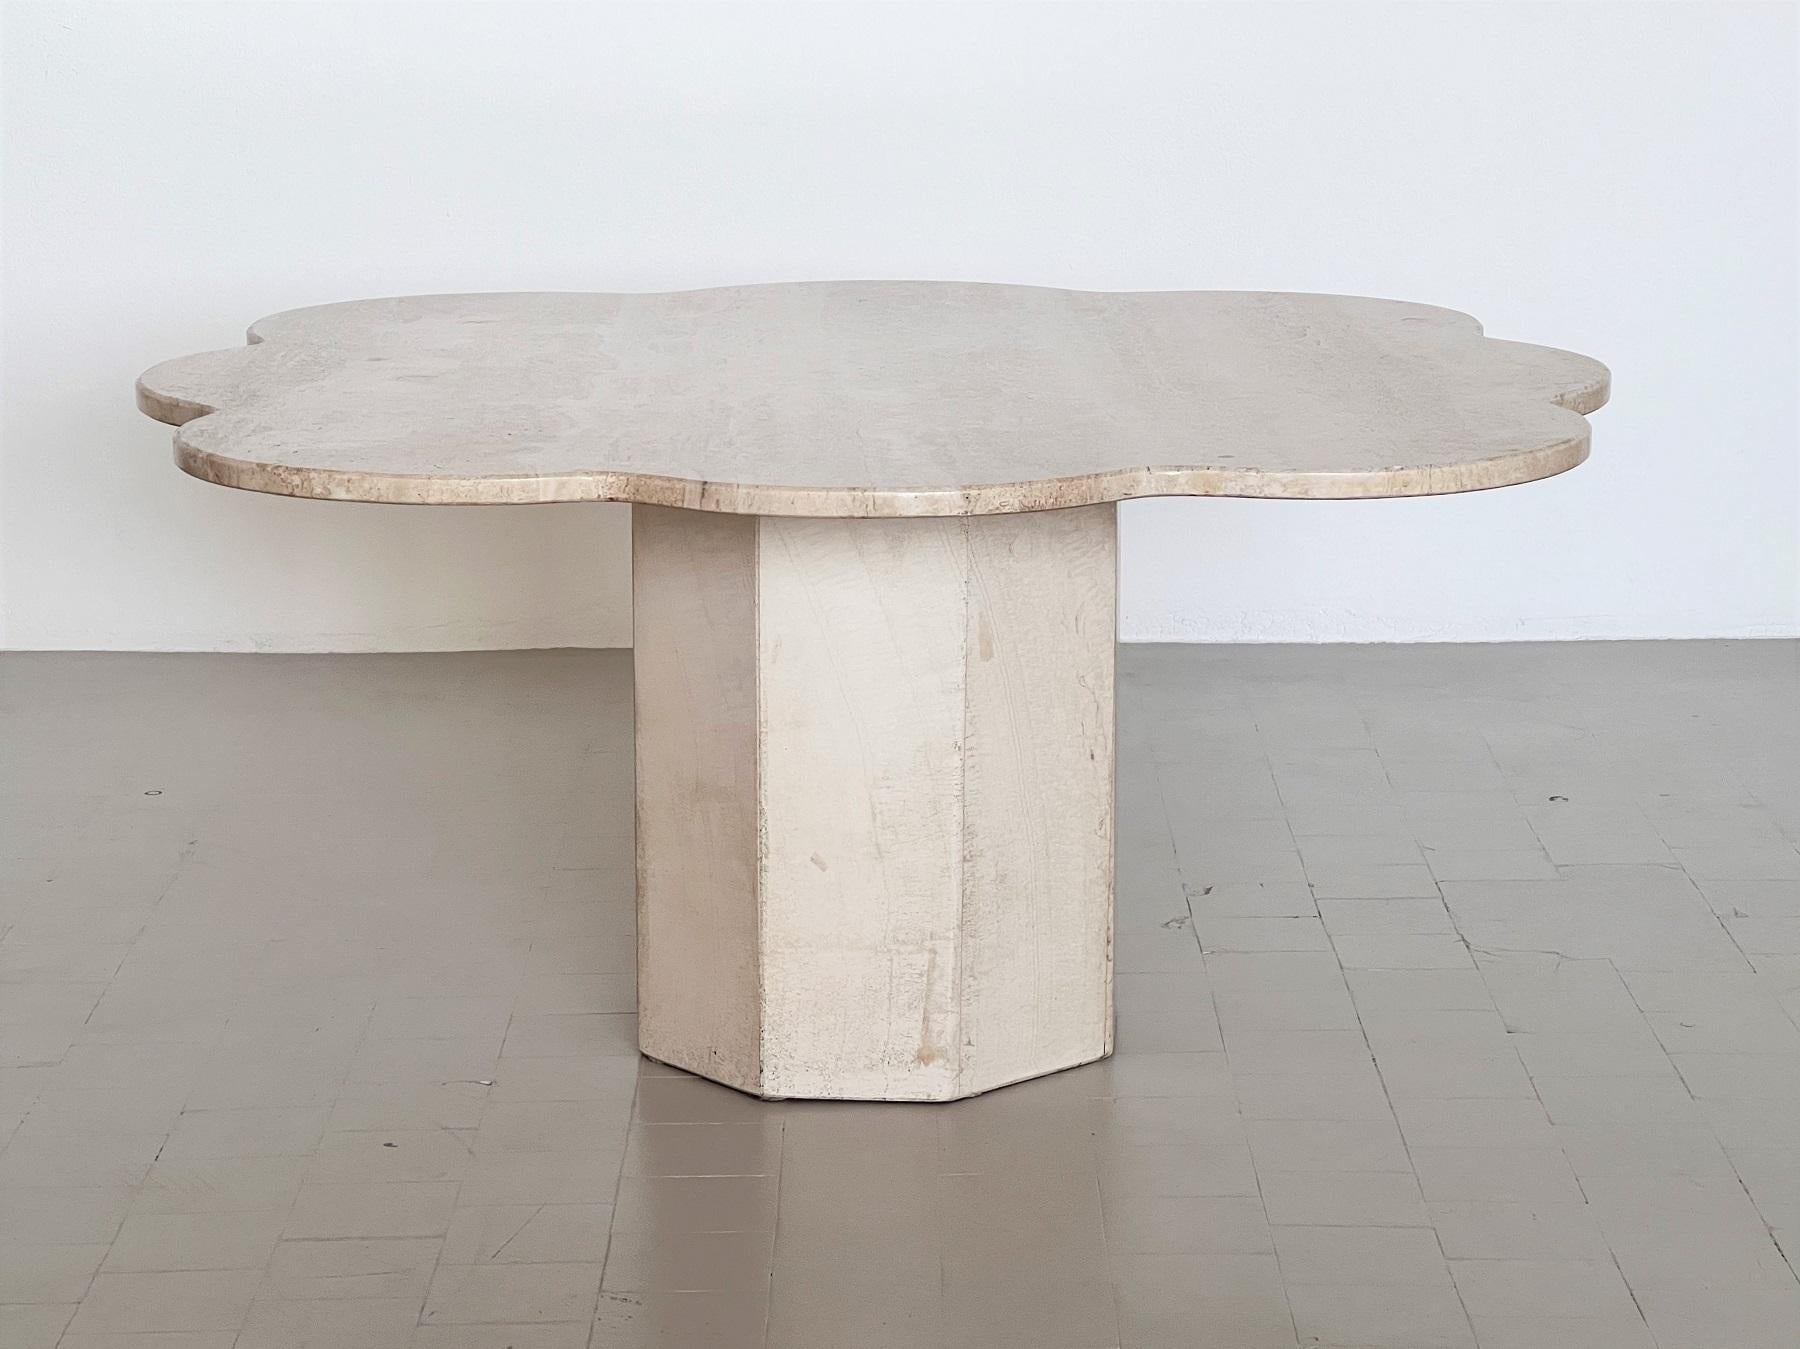 Hand-Crafted Italian Midcentury Coffee Table in Travertine Stone and Cloud Shape, 1970s